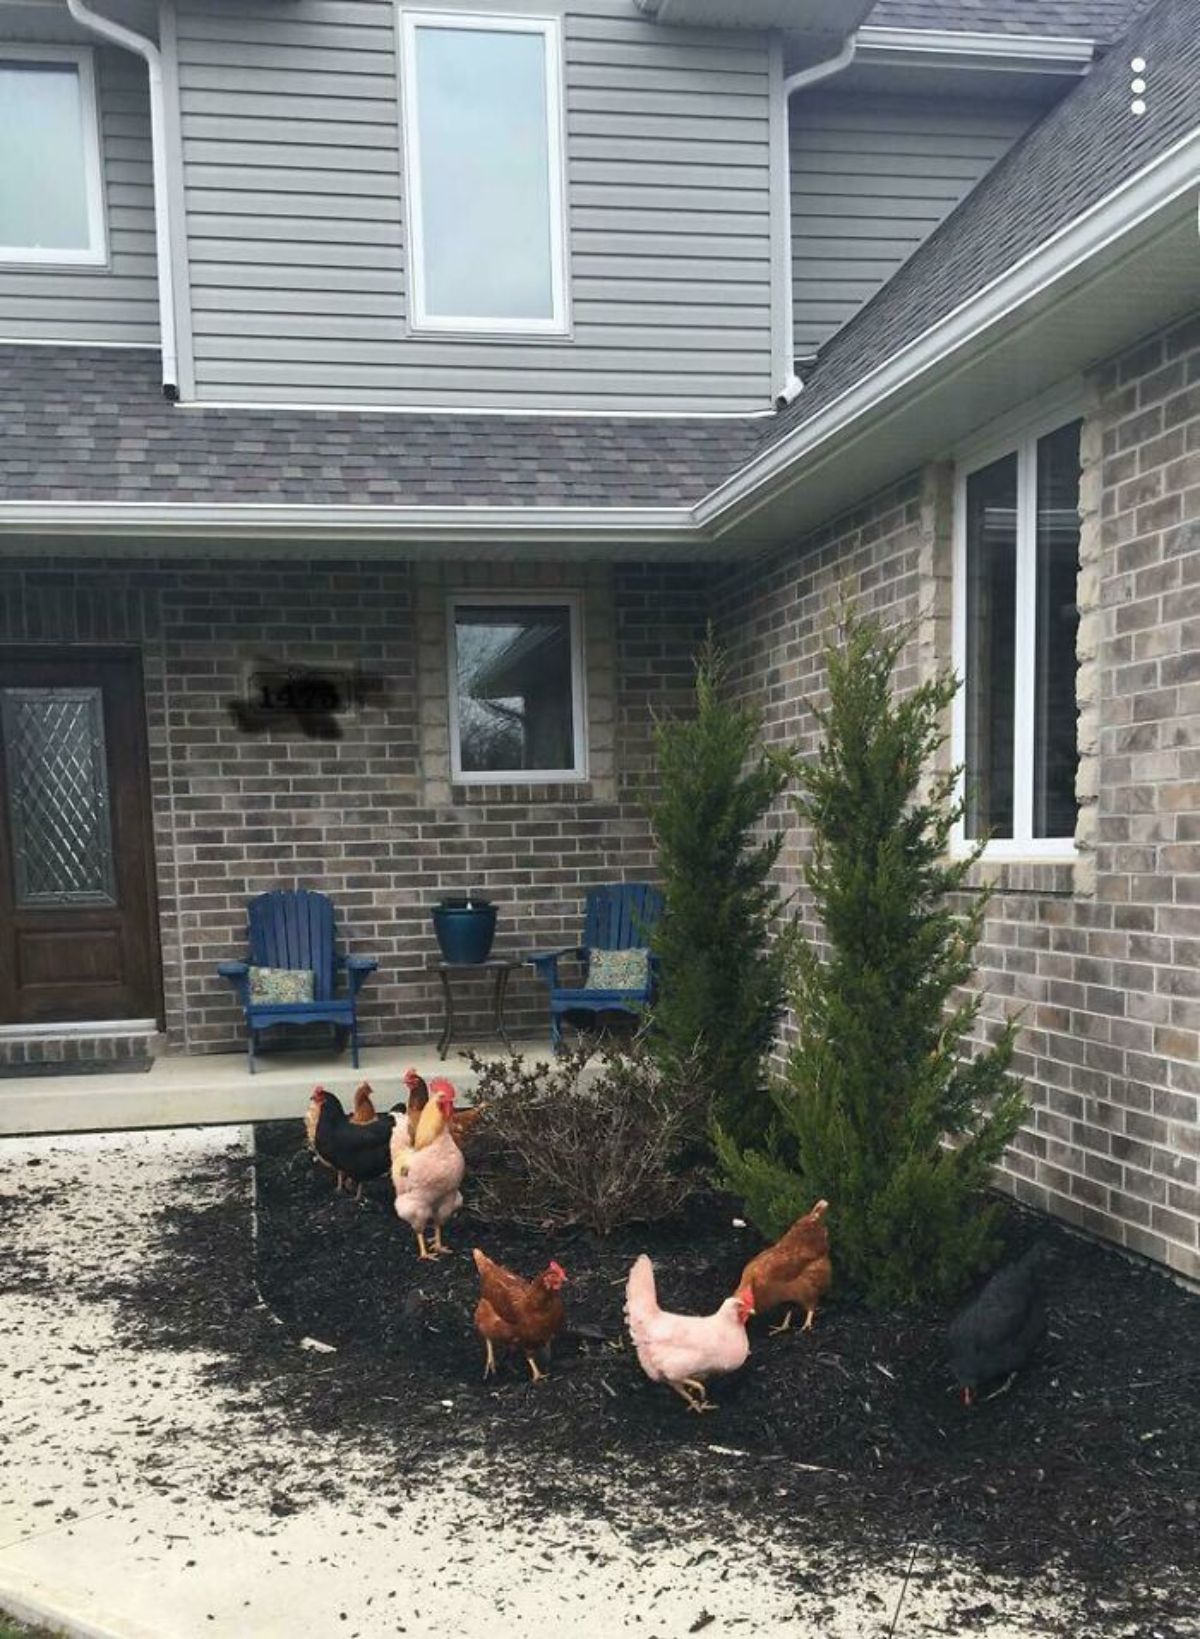 4 brown chickens, 1 black chicken and 2 pink chickens ripped up fire trees in someone's garden